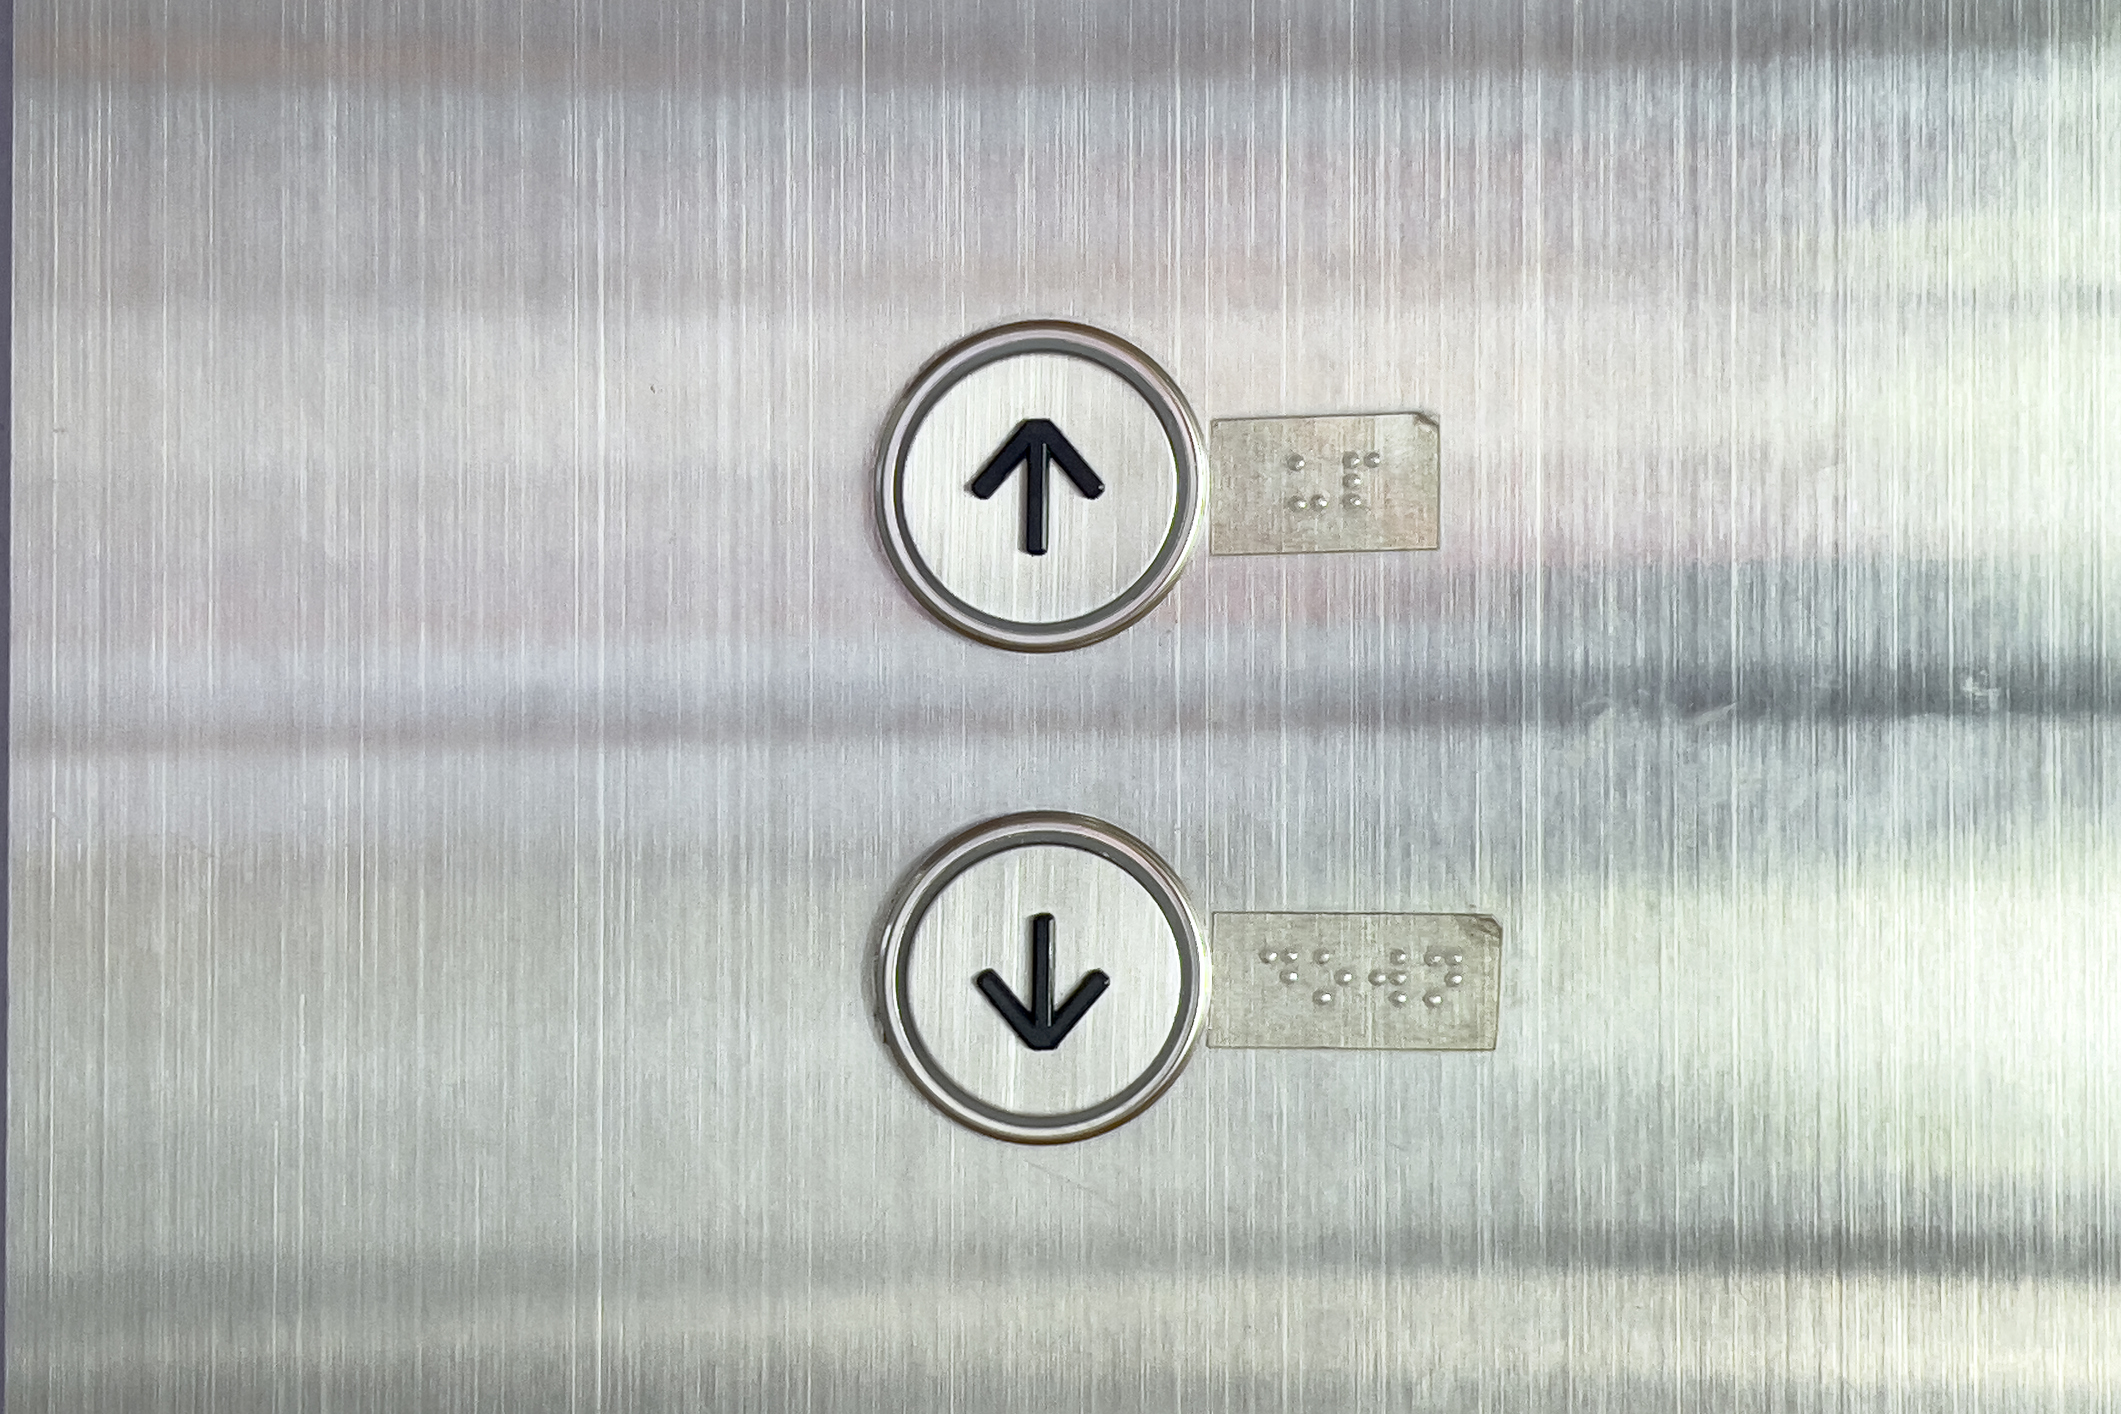 Buttons for an elevator